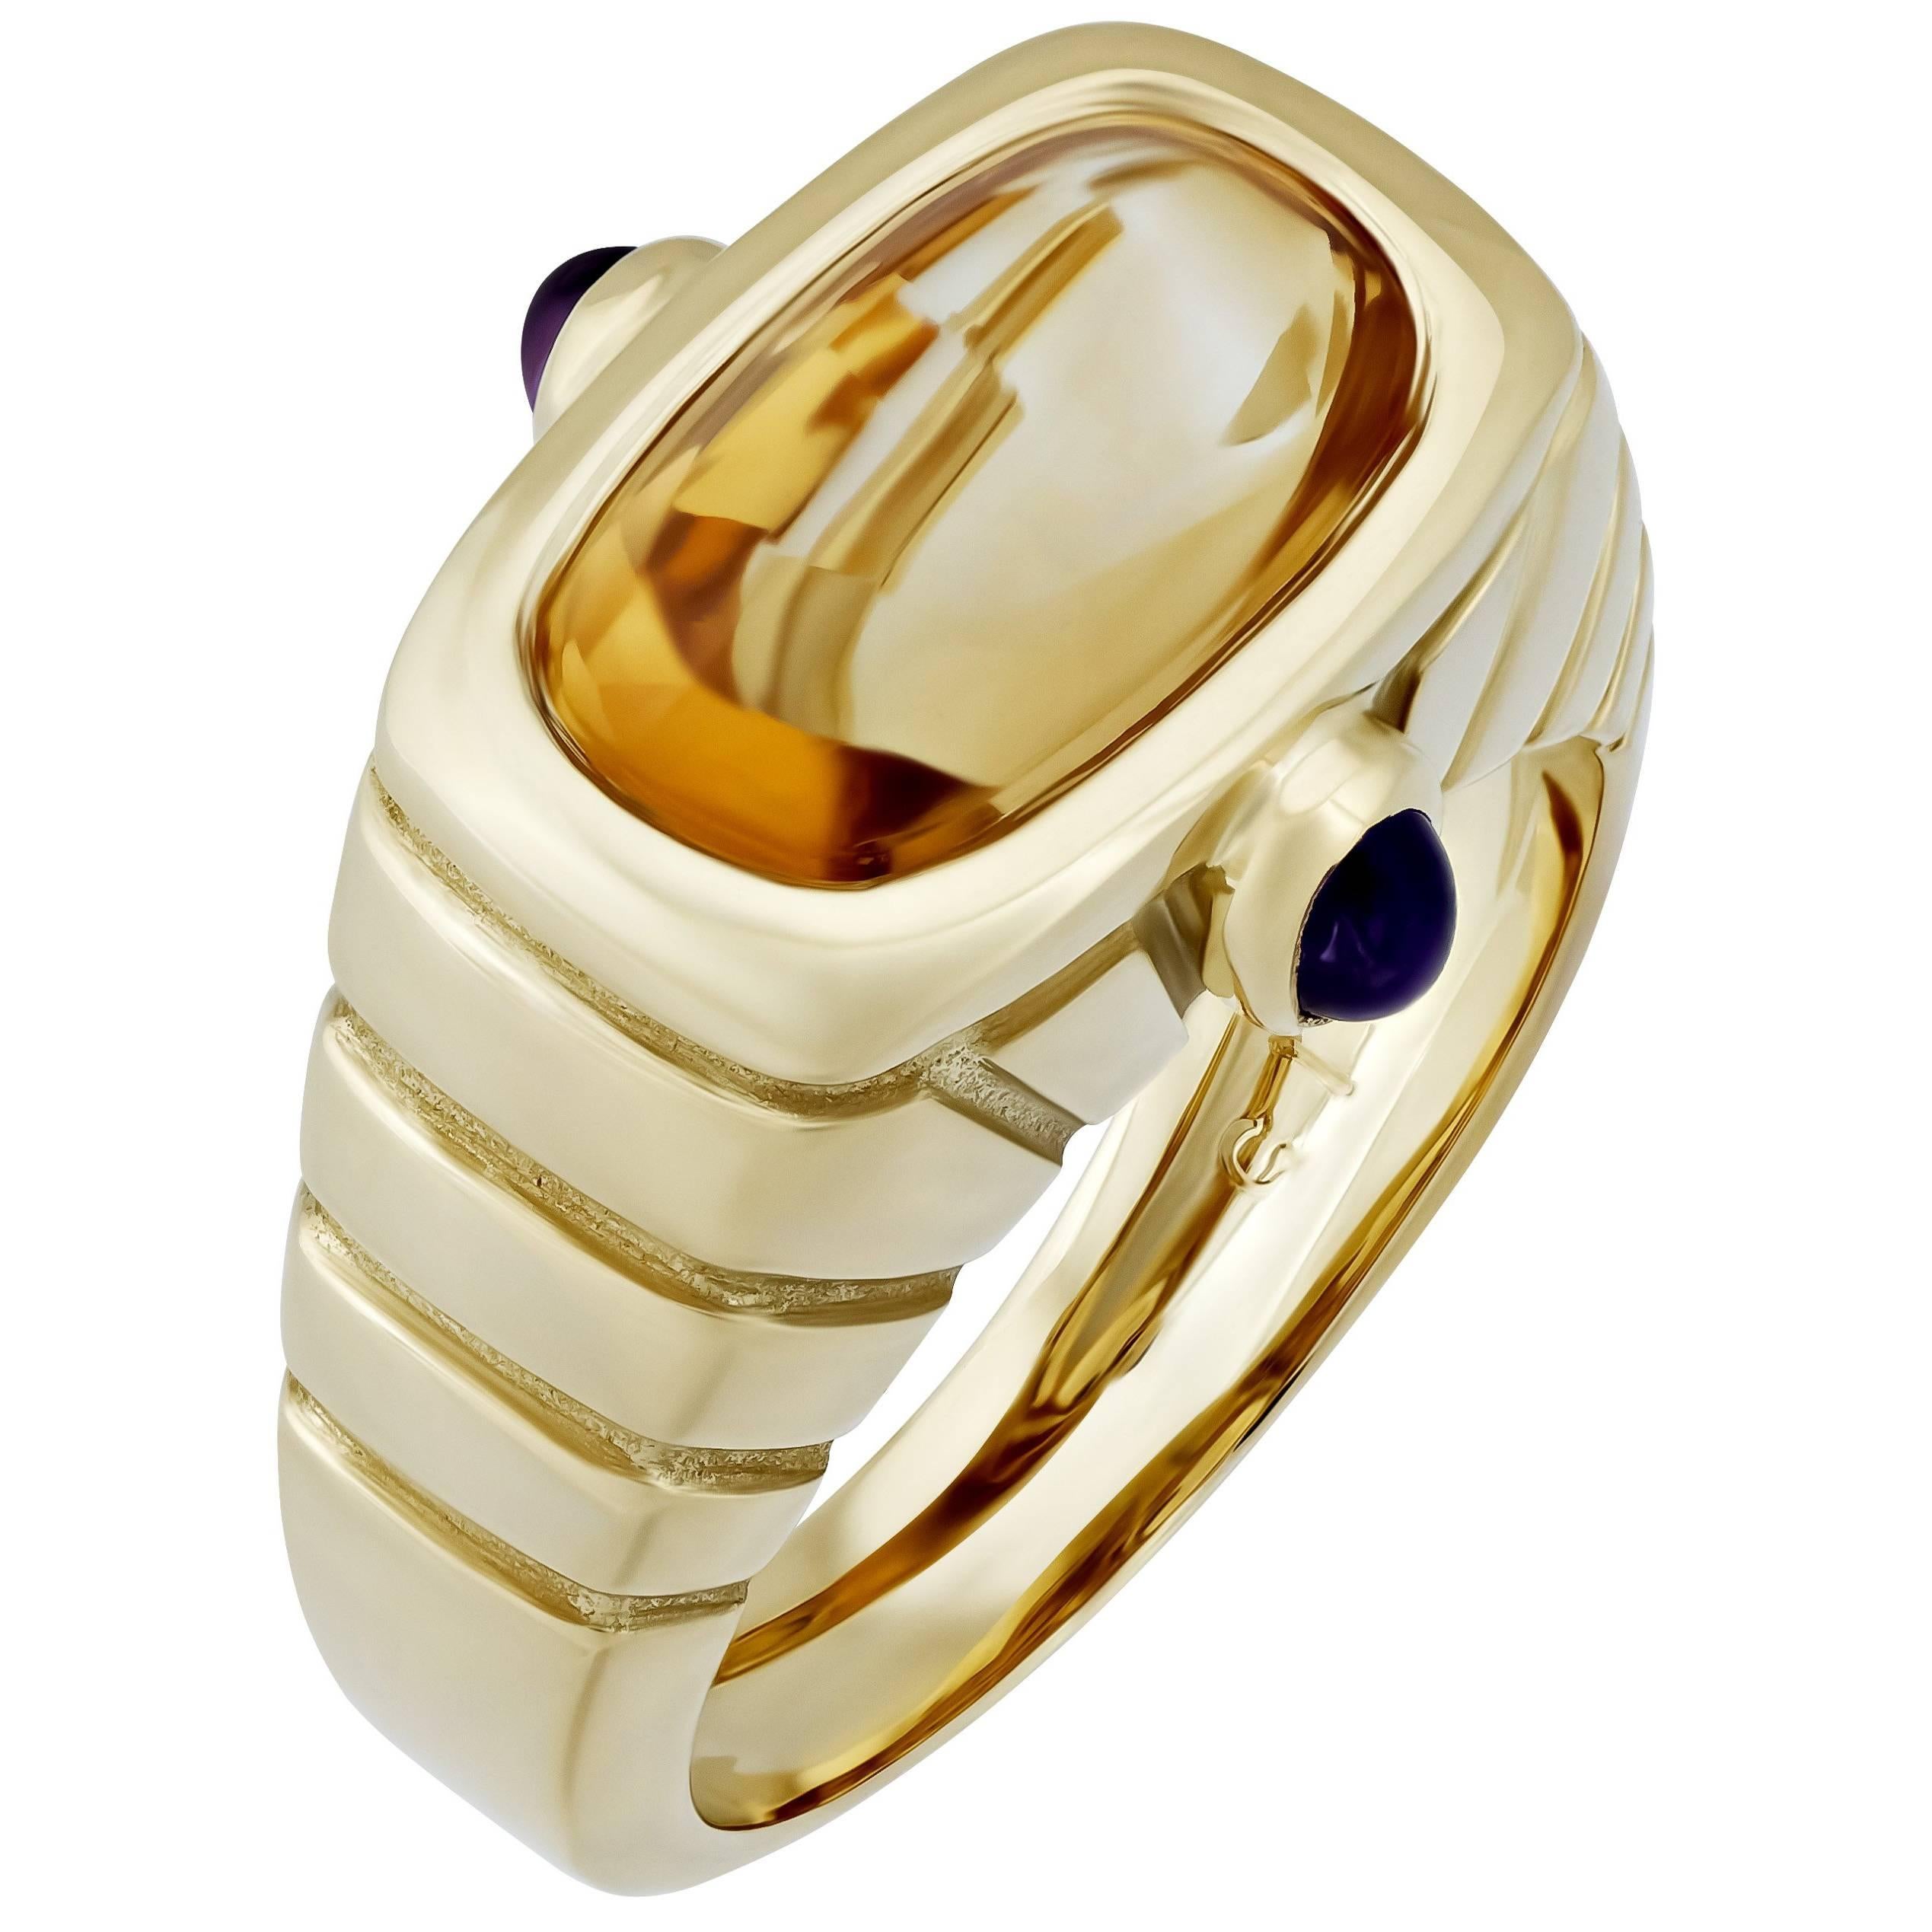 Van Cleef & Arpels Citrine and Amethyst Yellow Gold Ring